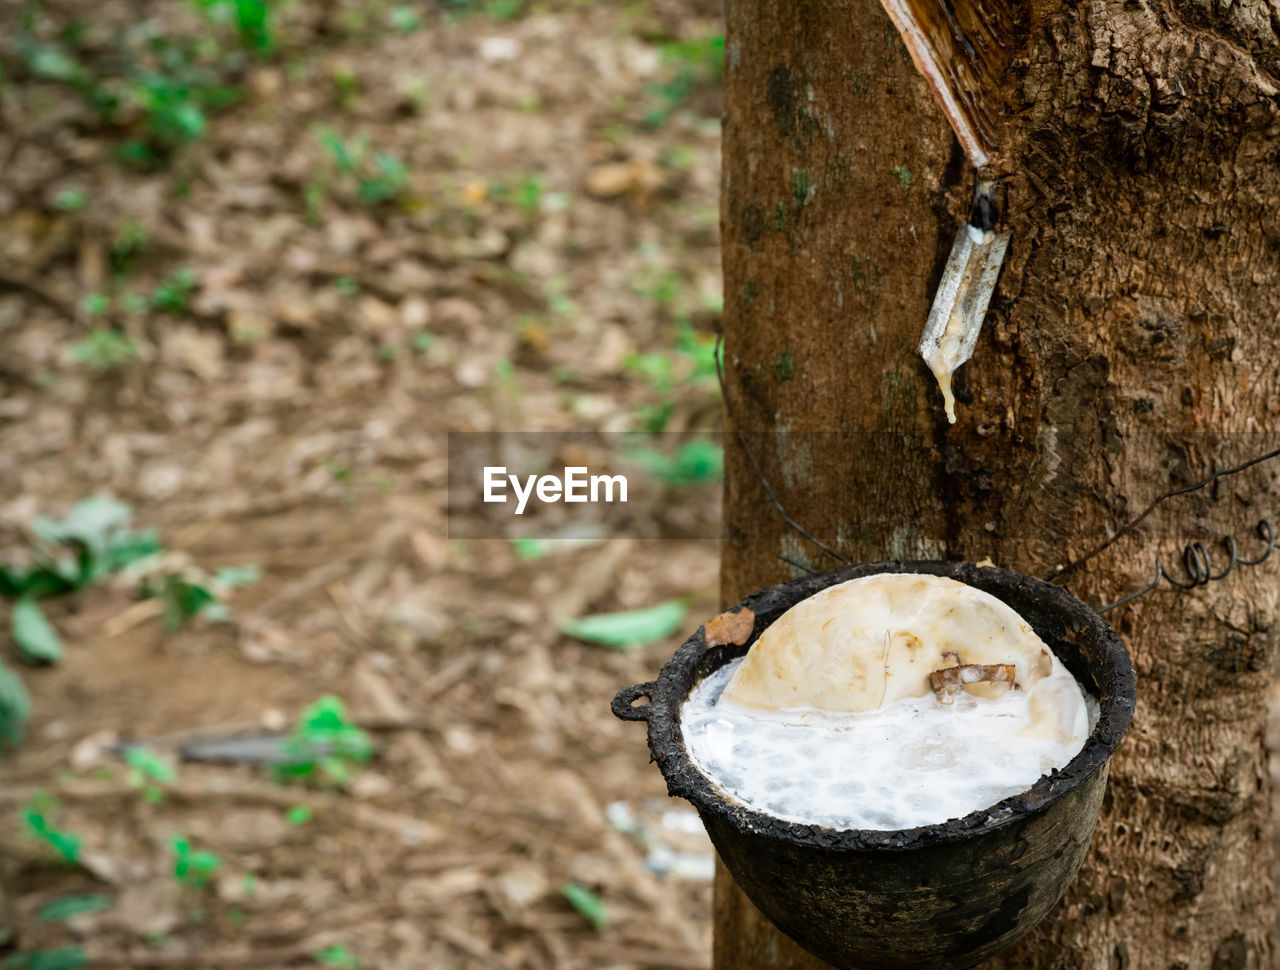 Rubber tree plantation. rubber tapping in rubber tree garden in thailand. natural latex extracted.